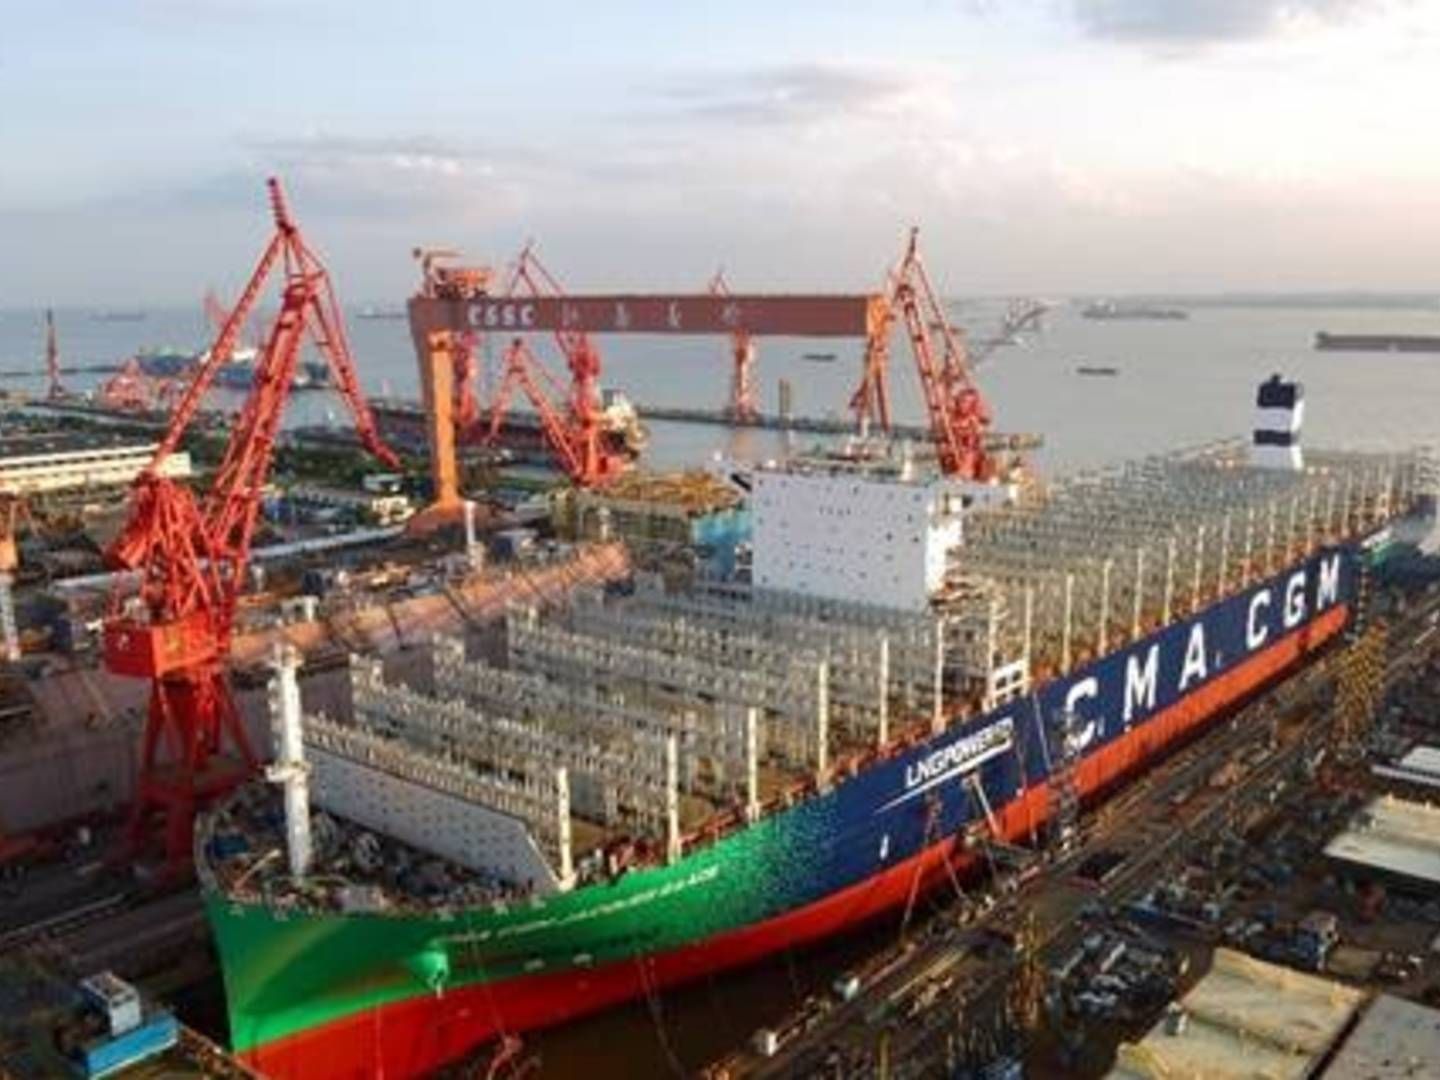 The coalition fears that the legislation will promote LNG instead of more sustainable fuels. | Photo: CMA CGM - PR